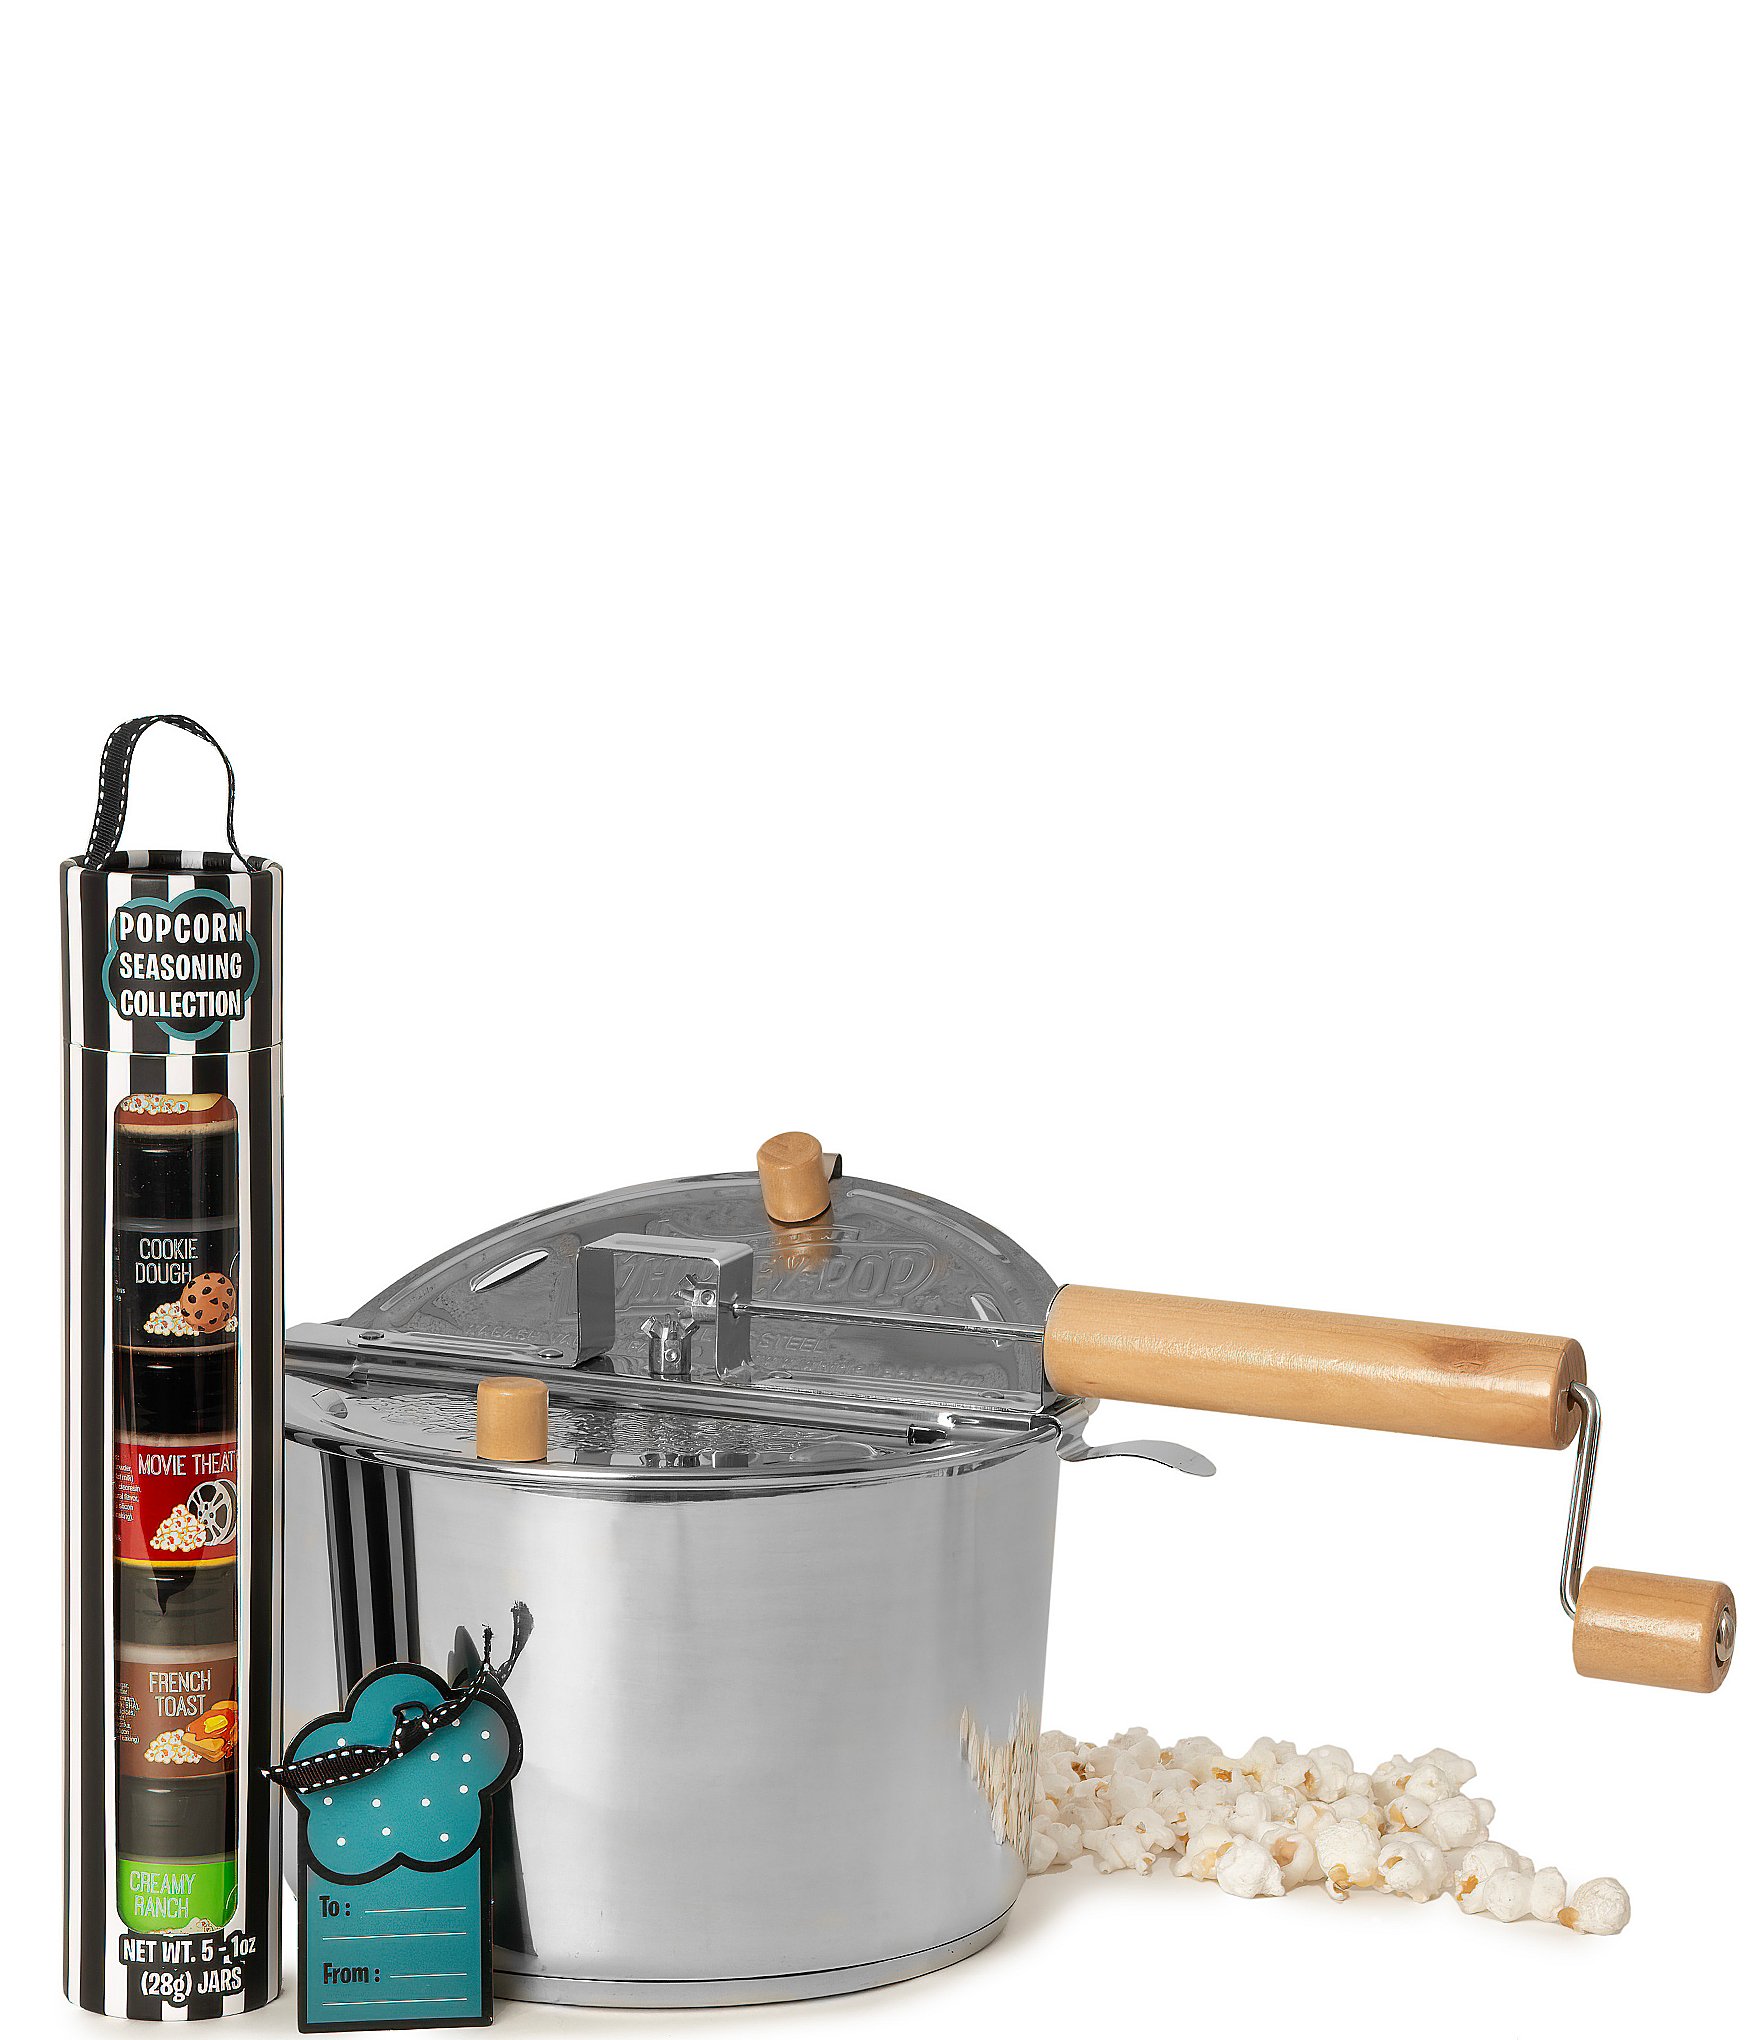 Nothing beats stovetop popcorn and the Whirley Pop Stainless-Steel